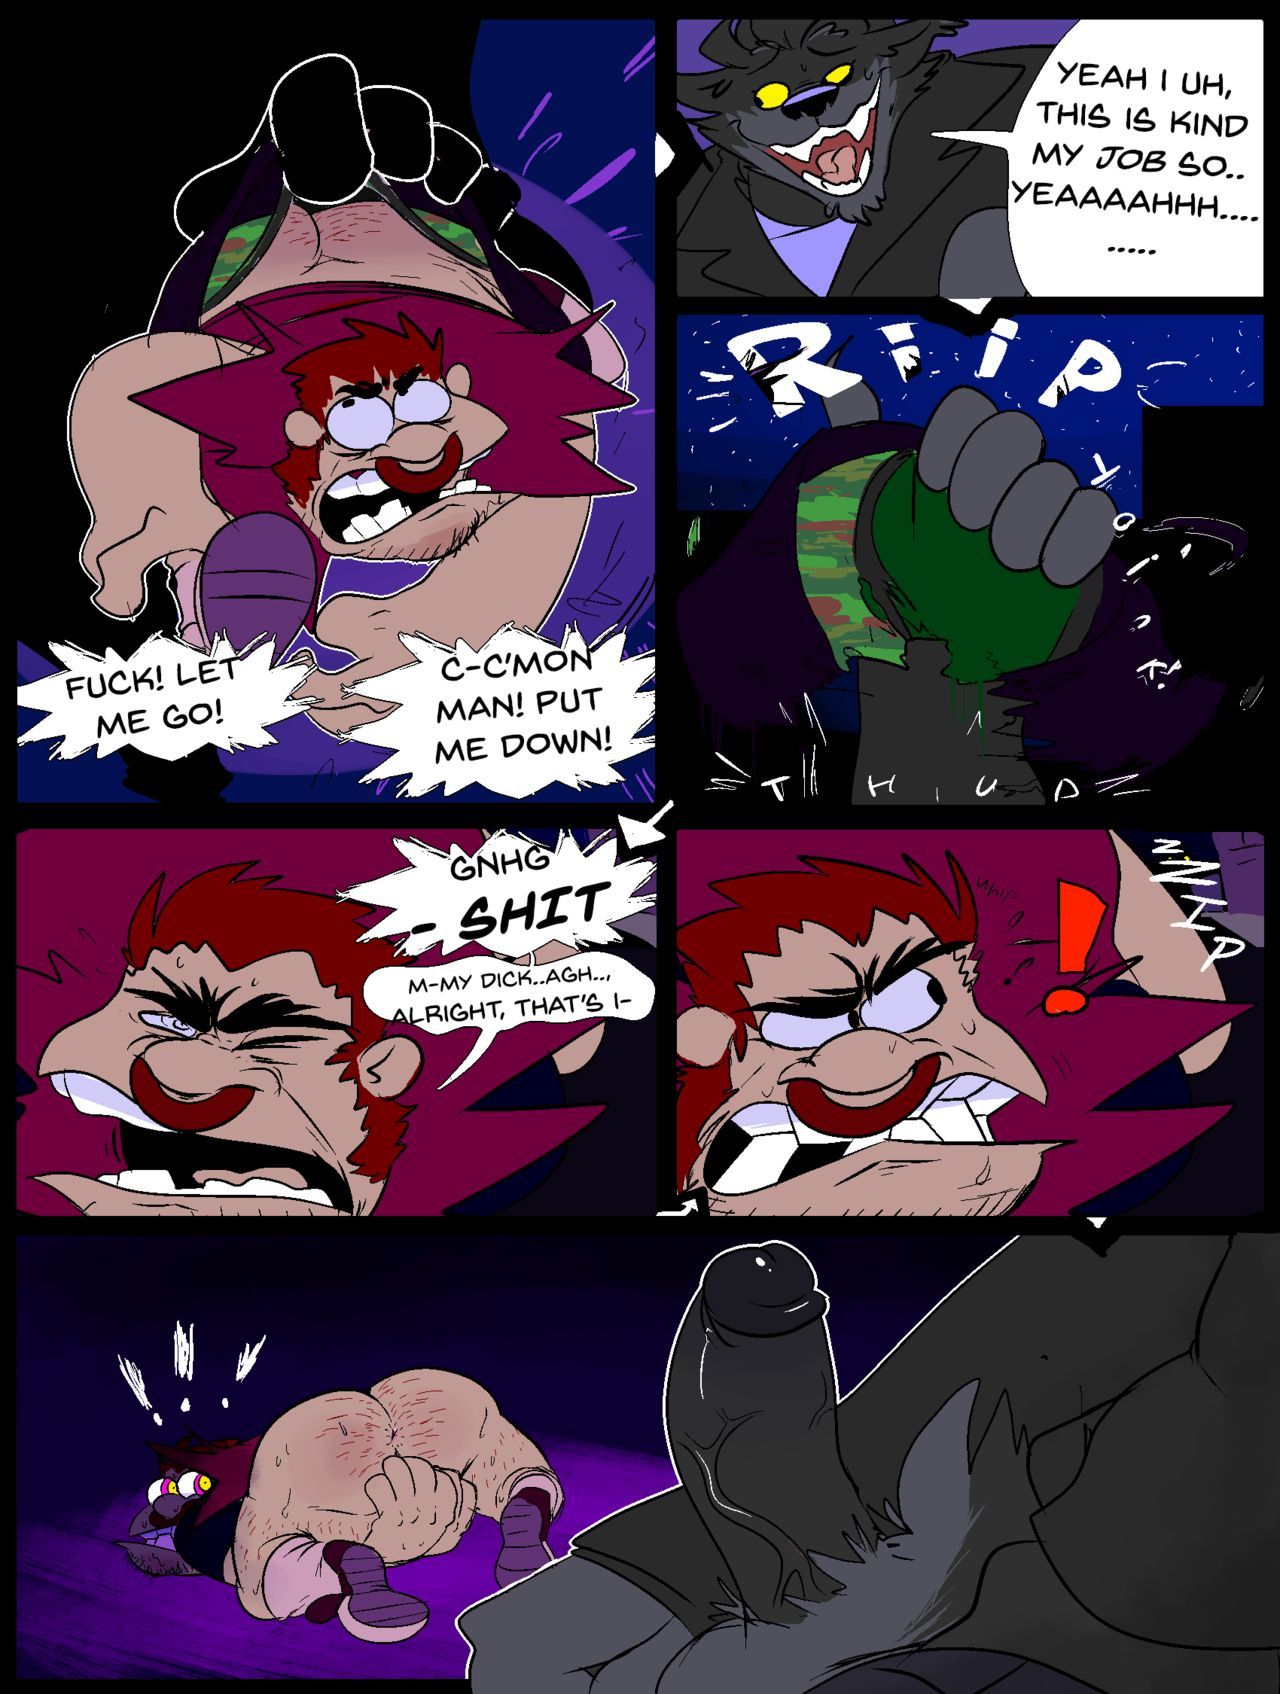 [Torquewintress] Karma and the Bully 19